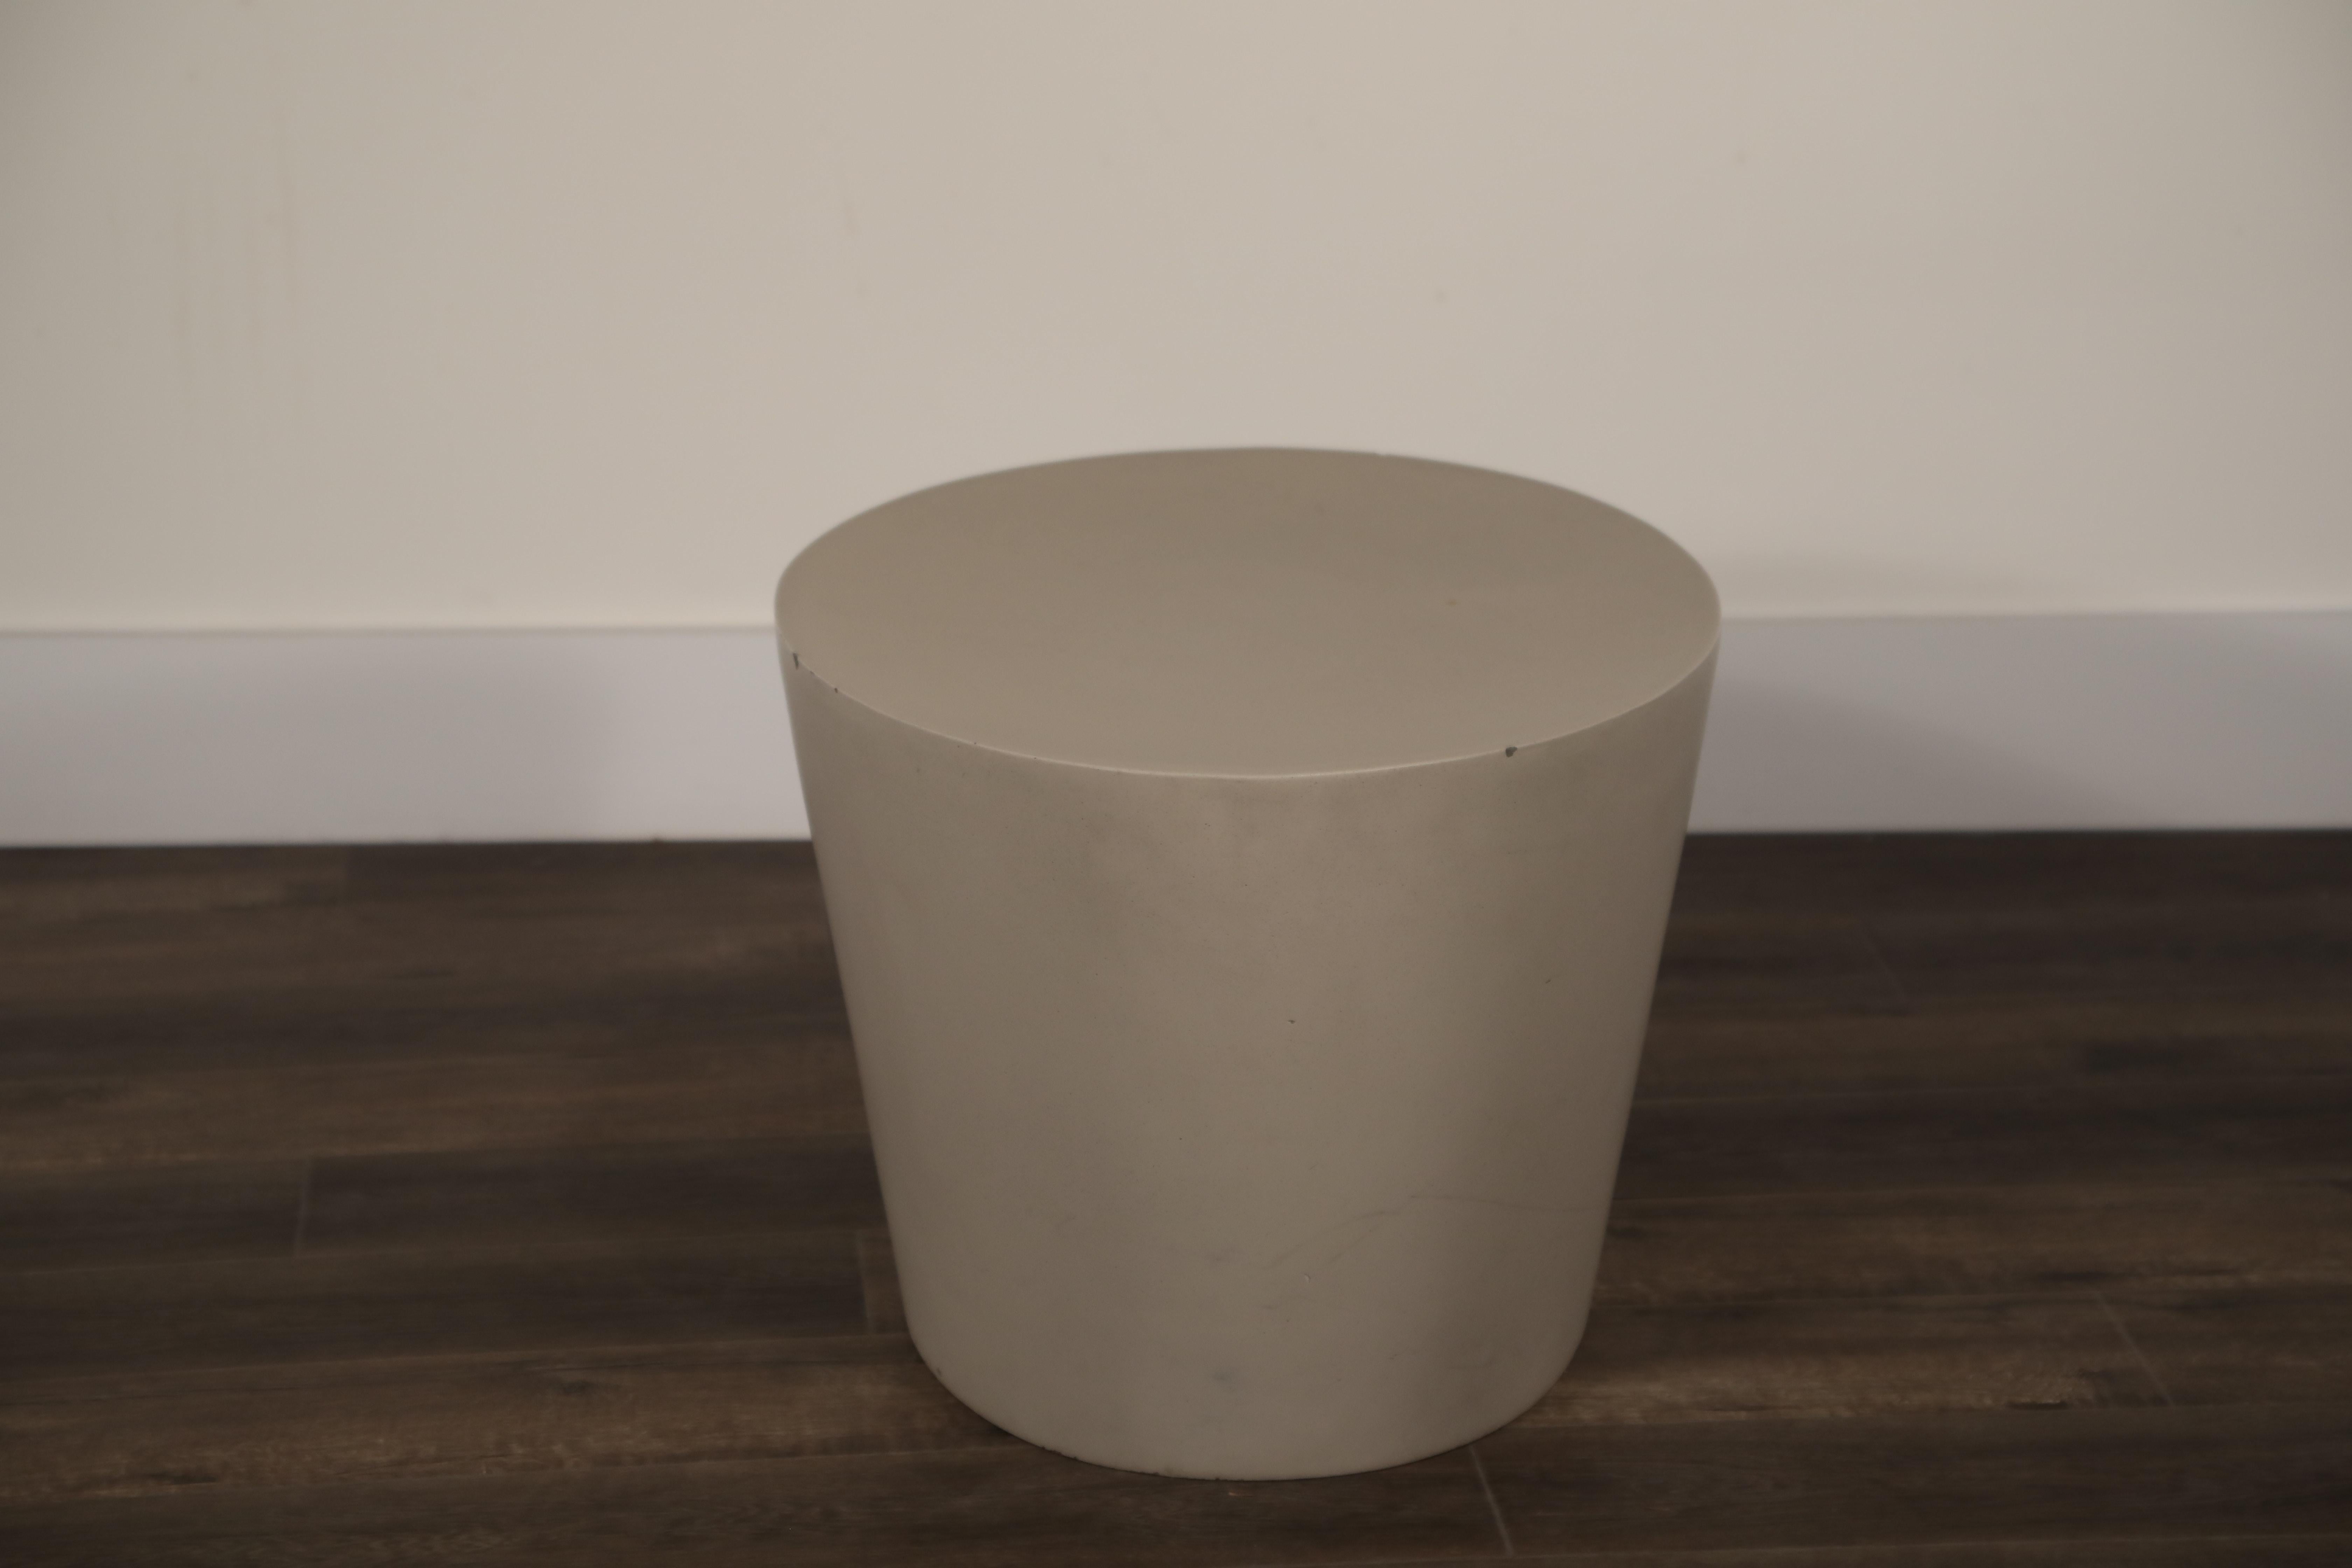 Maya Lin 1st-Generation Concrete Stool for Knoll Studio, Signed and Stamped 1998 9